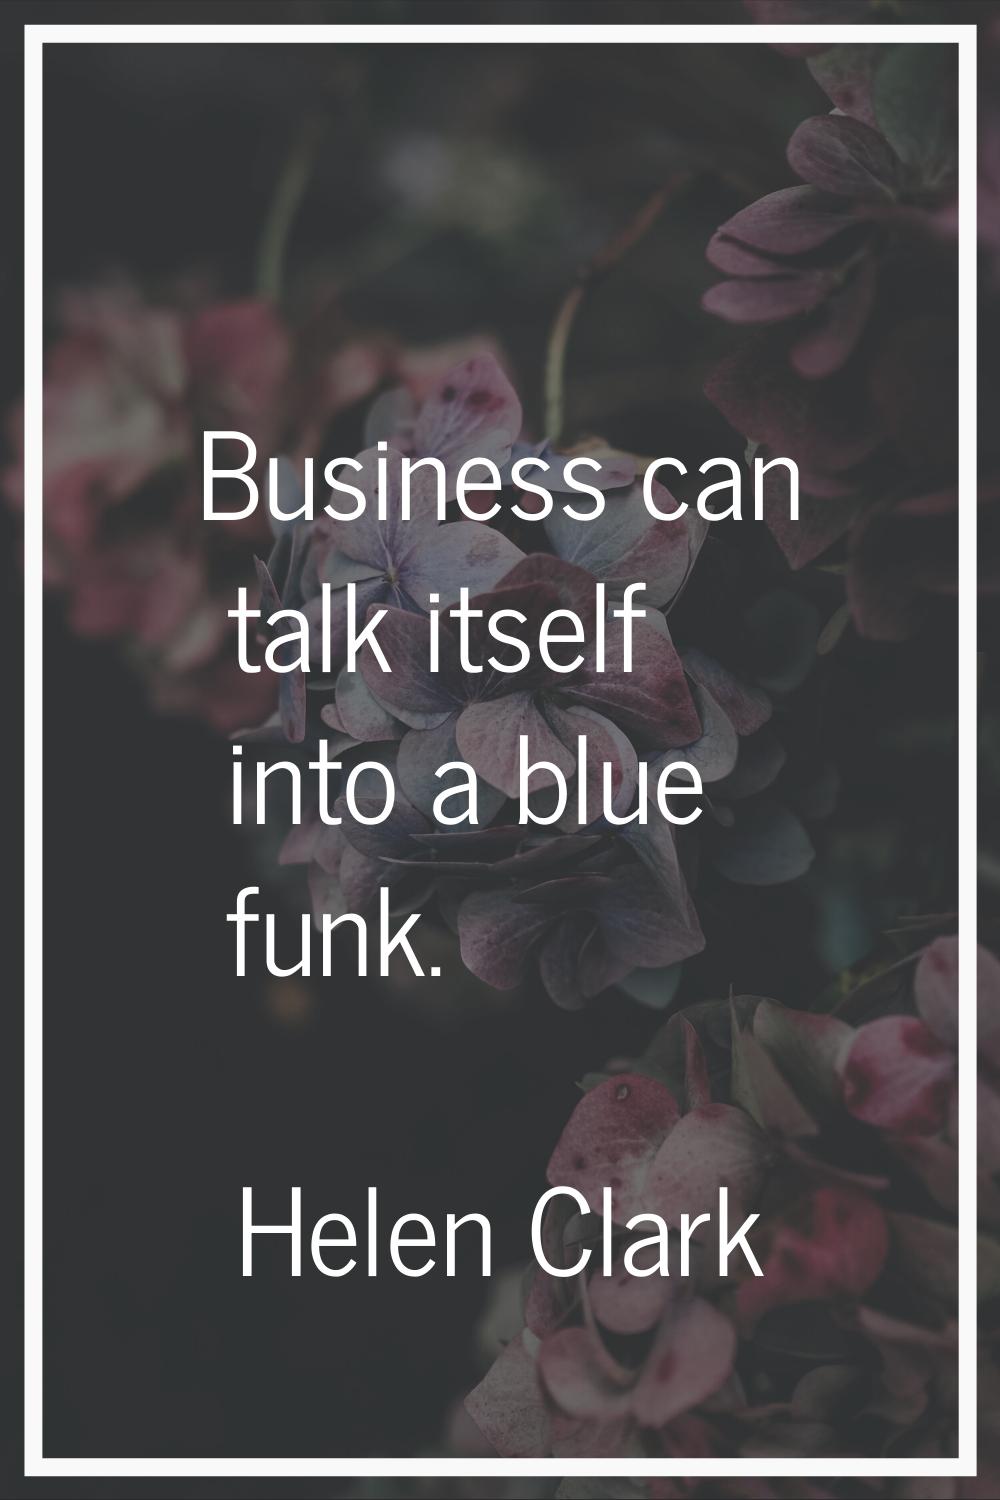 Business can talk itself into a blue funk.